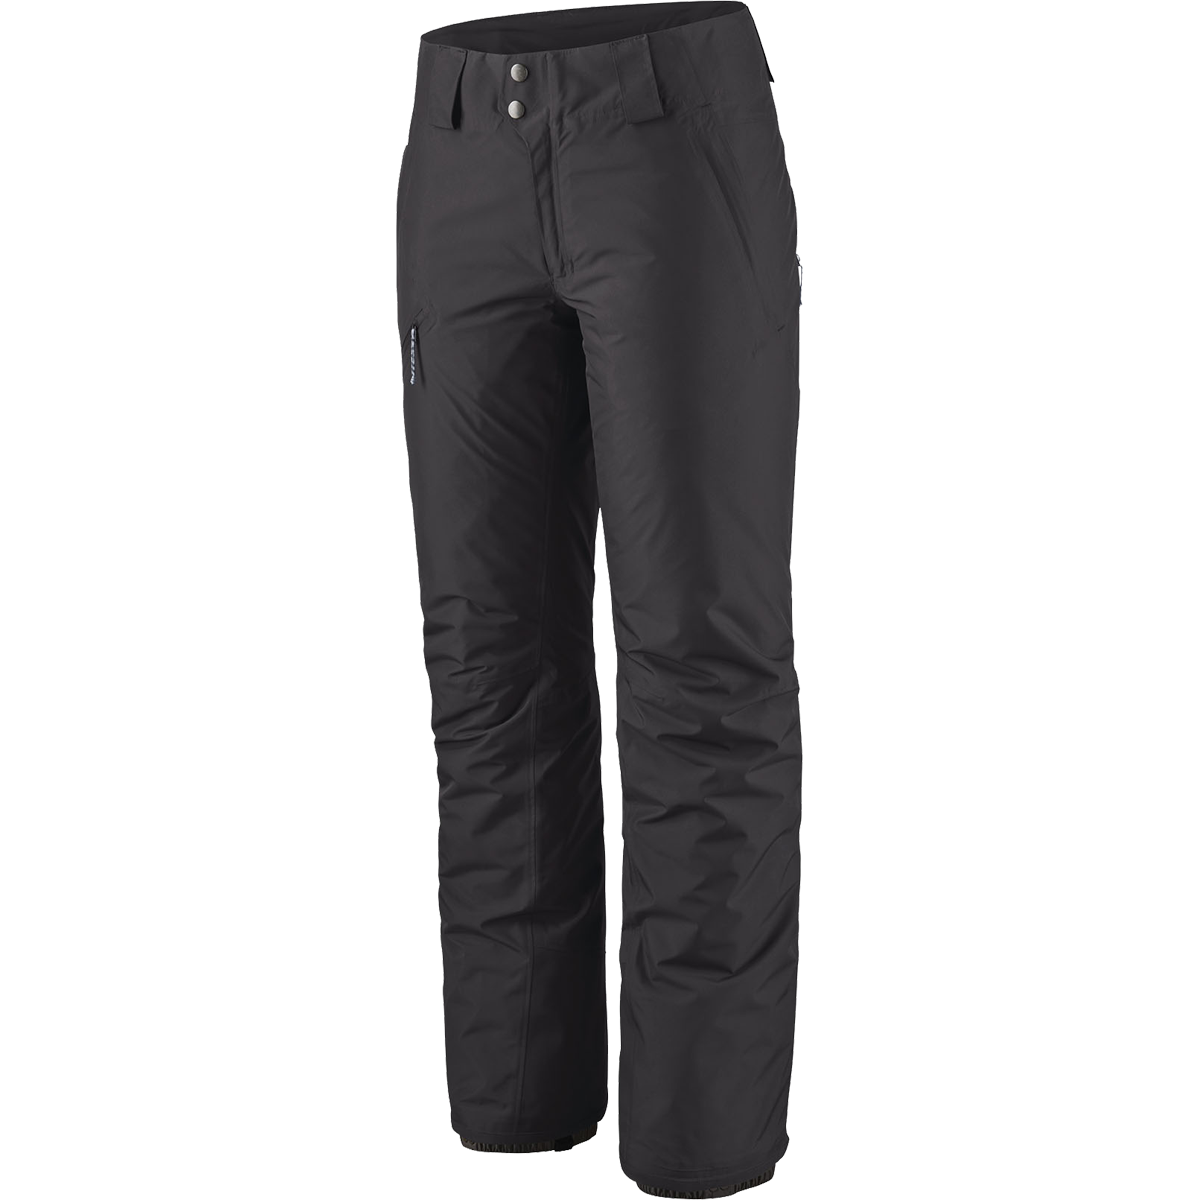 Women's Insulated Powder Town Pants alternate view